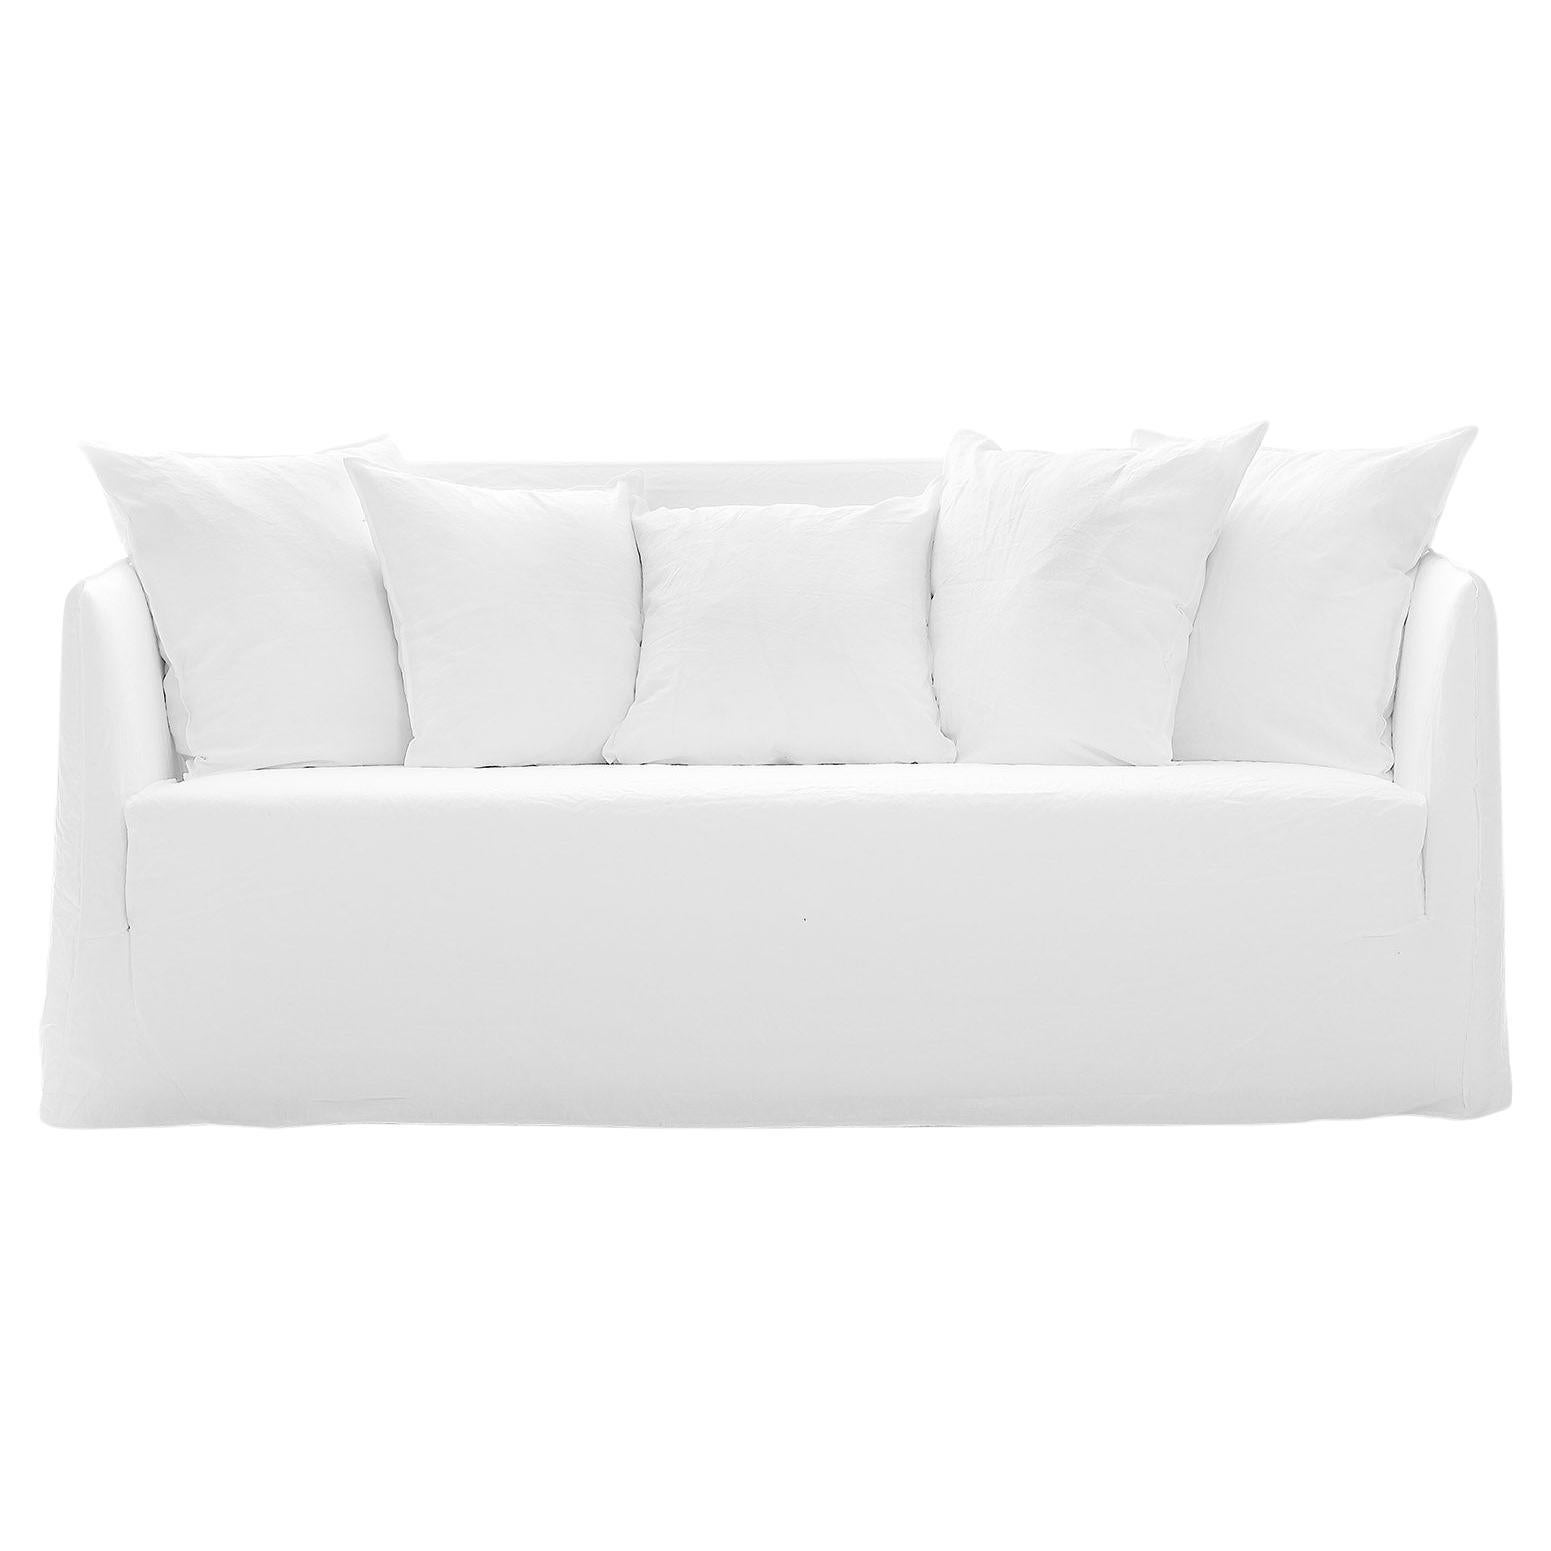 Gervasoni Ghost 10 Sofa in White Linen Upholstery by Paola Navone For Sale